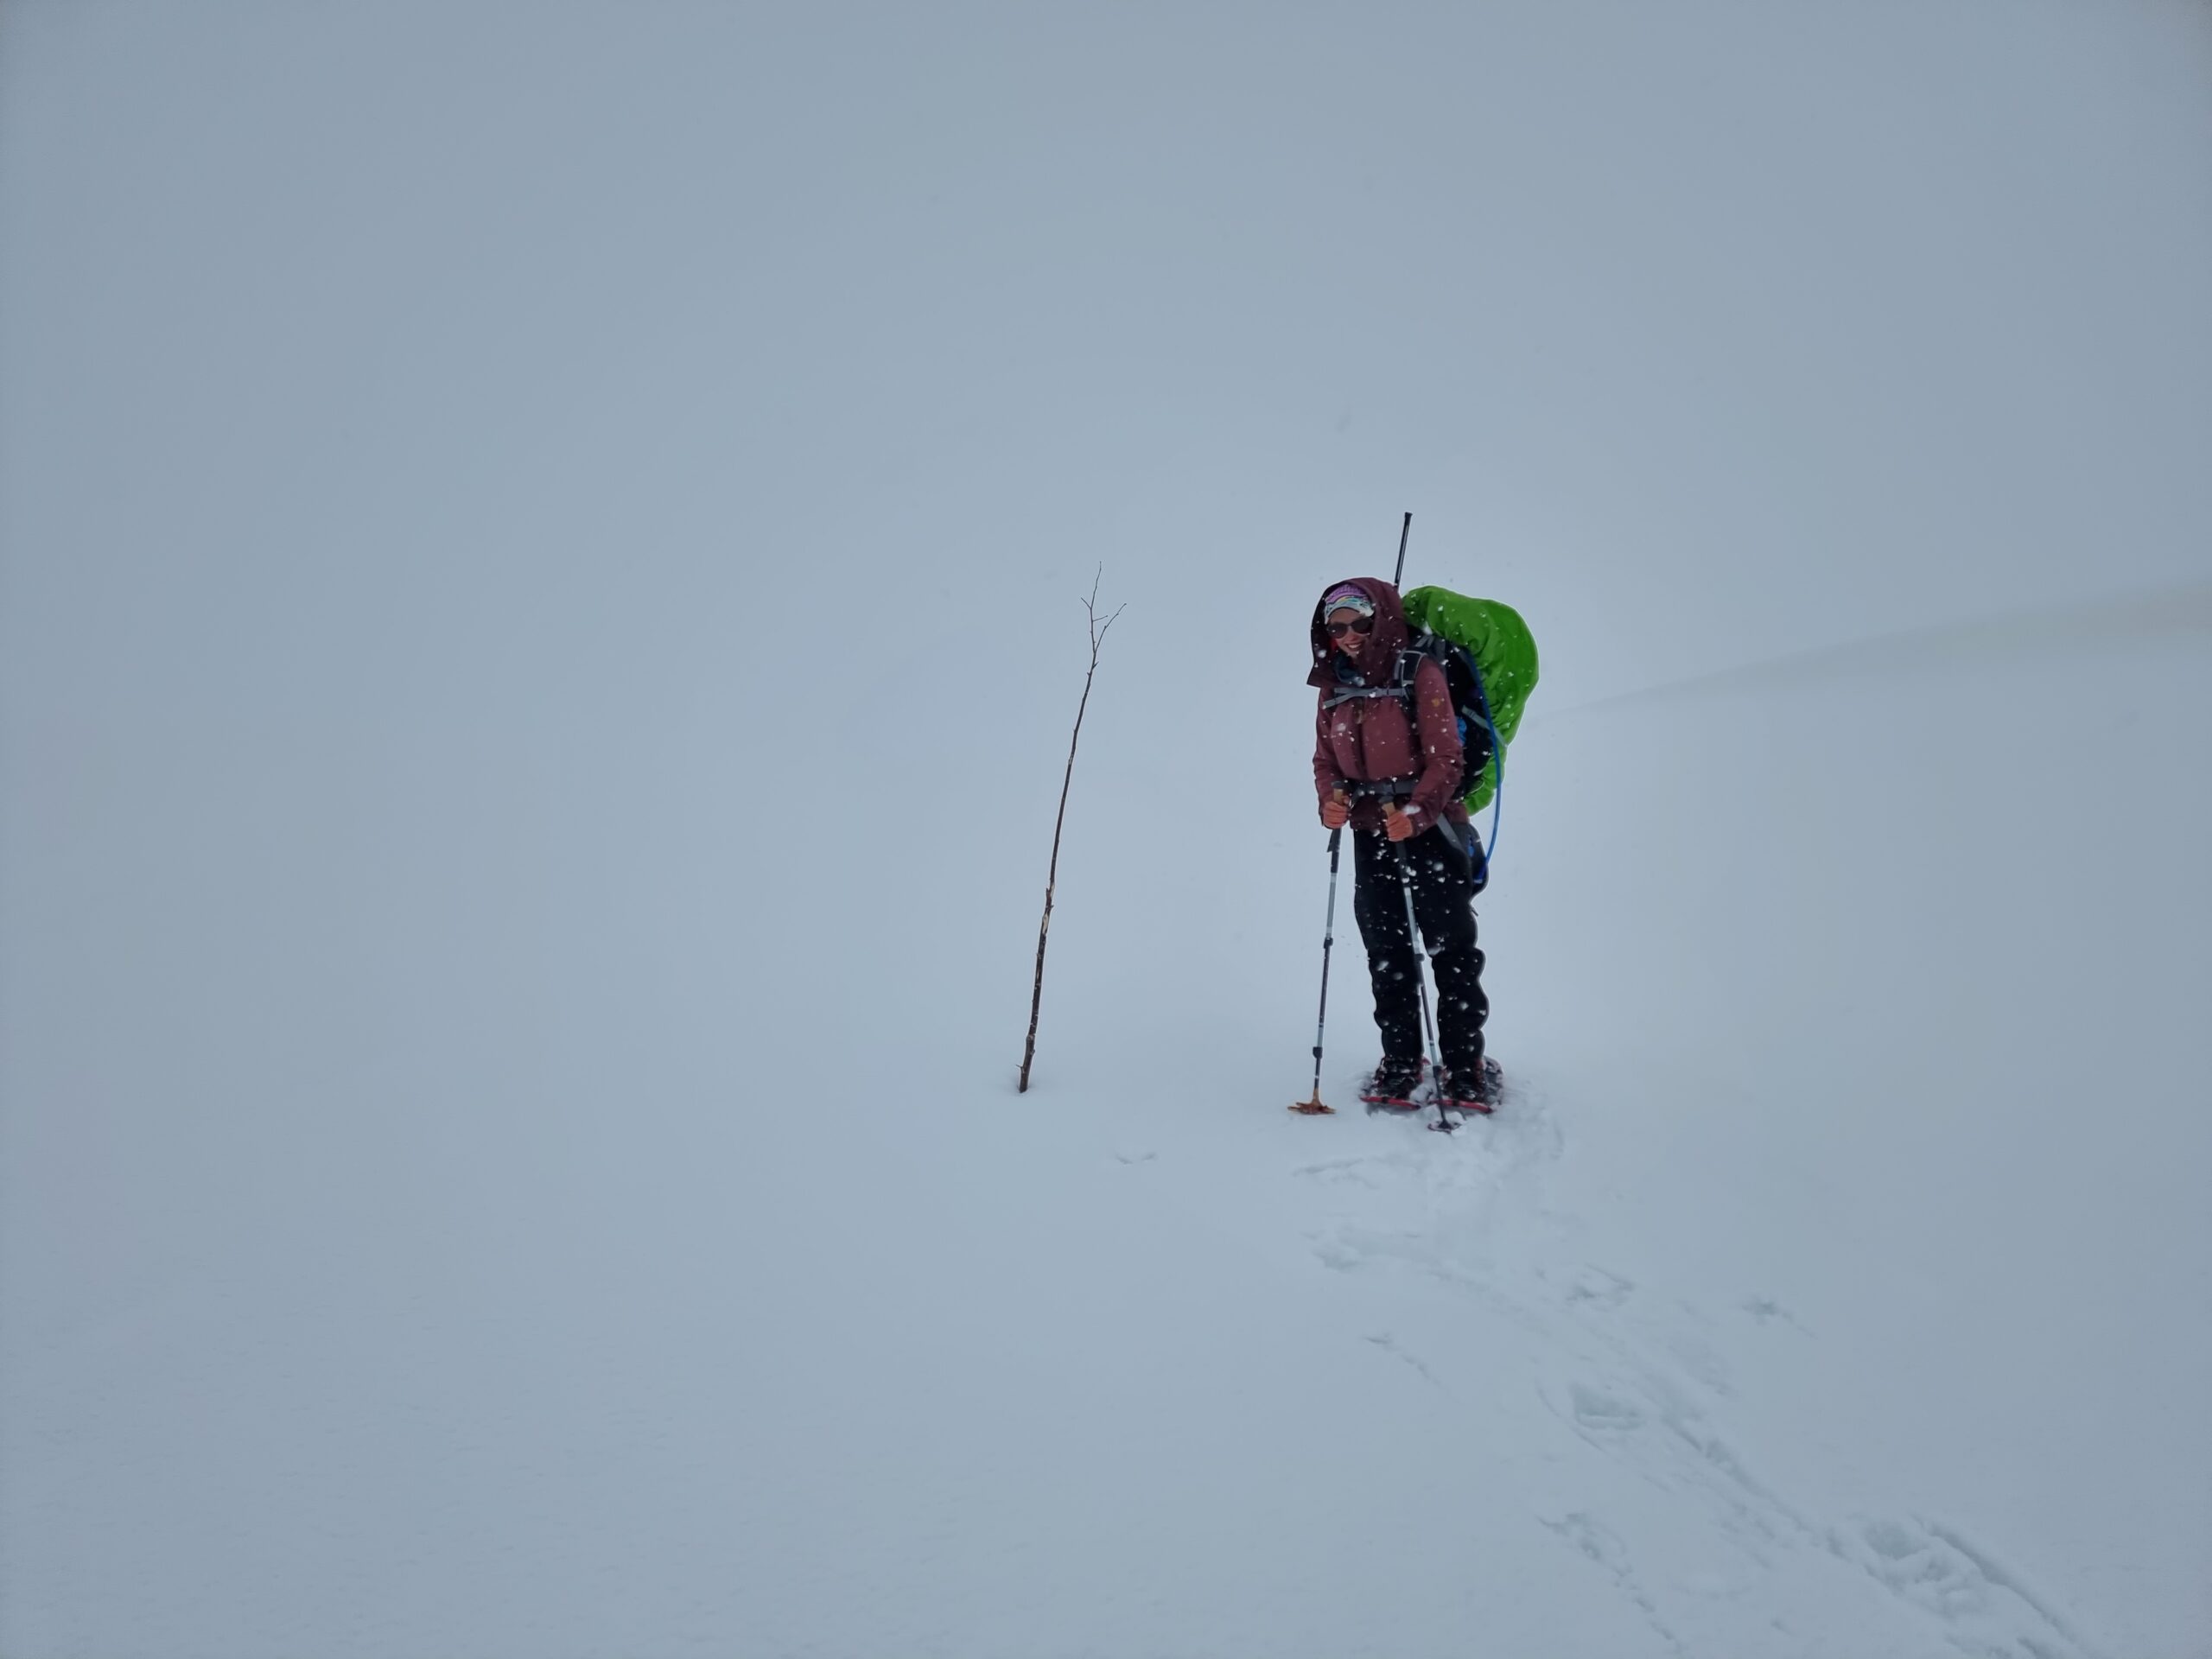 You are currently viewing Day 39 – Lite med sikt oppe på fjellet (Reduced visibility up at the mountain)